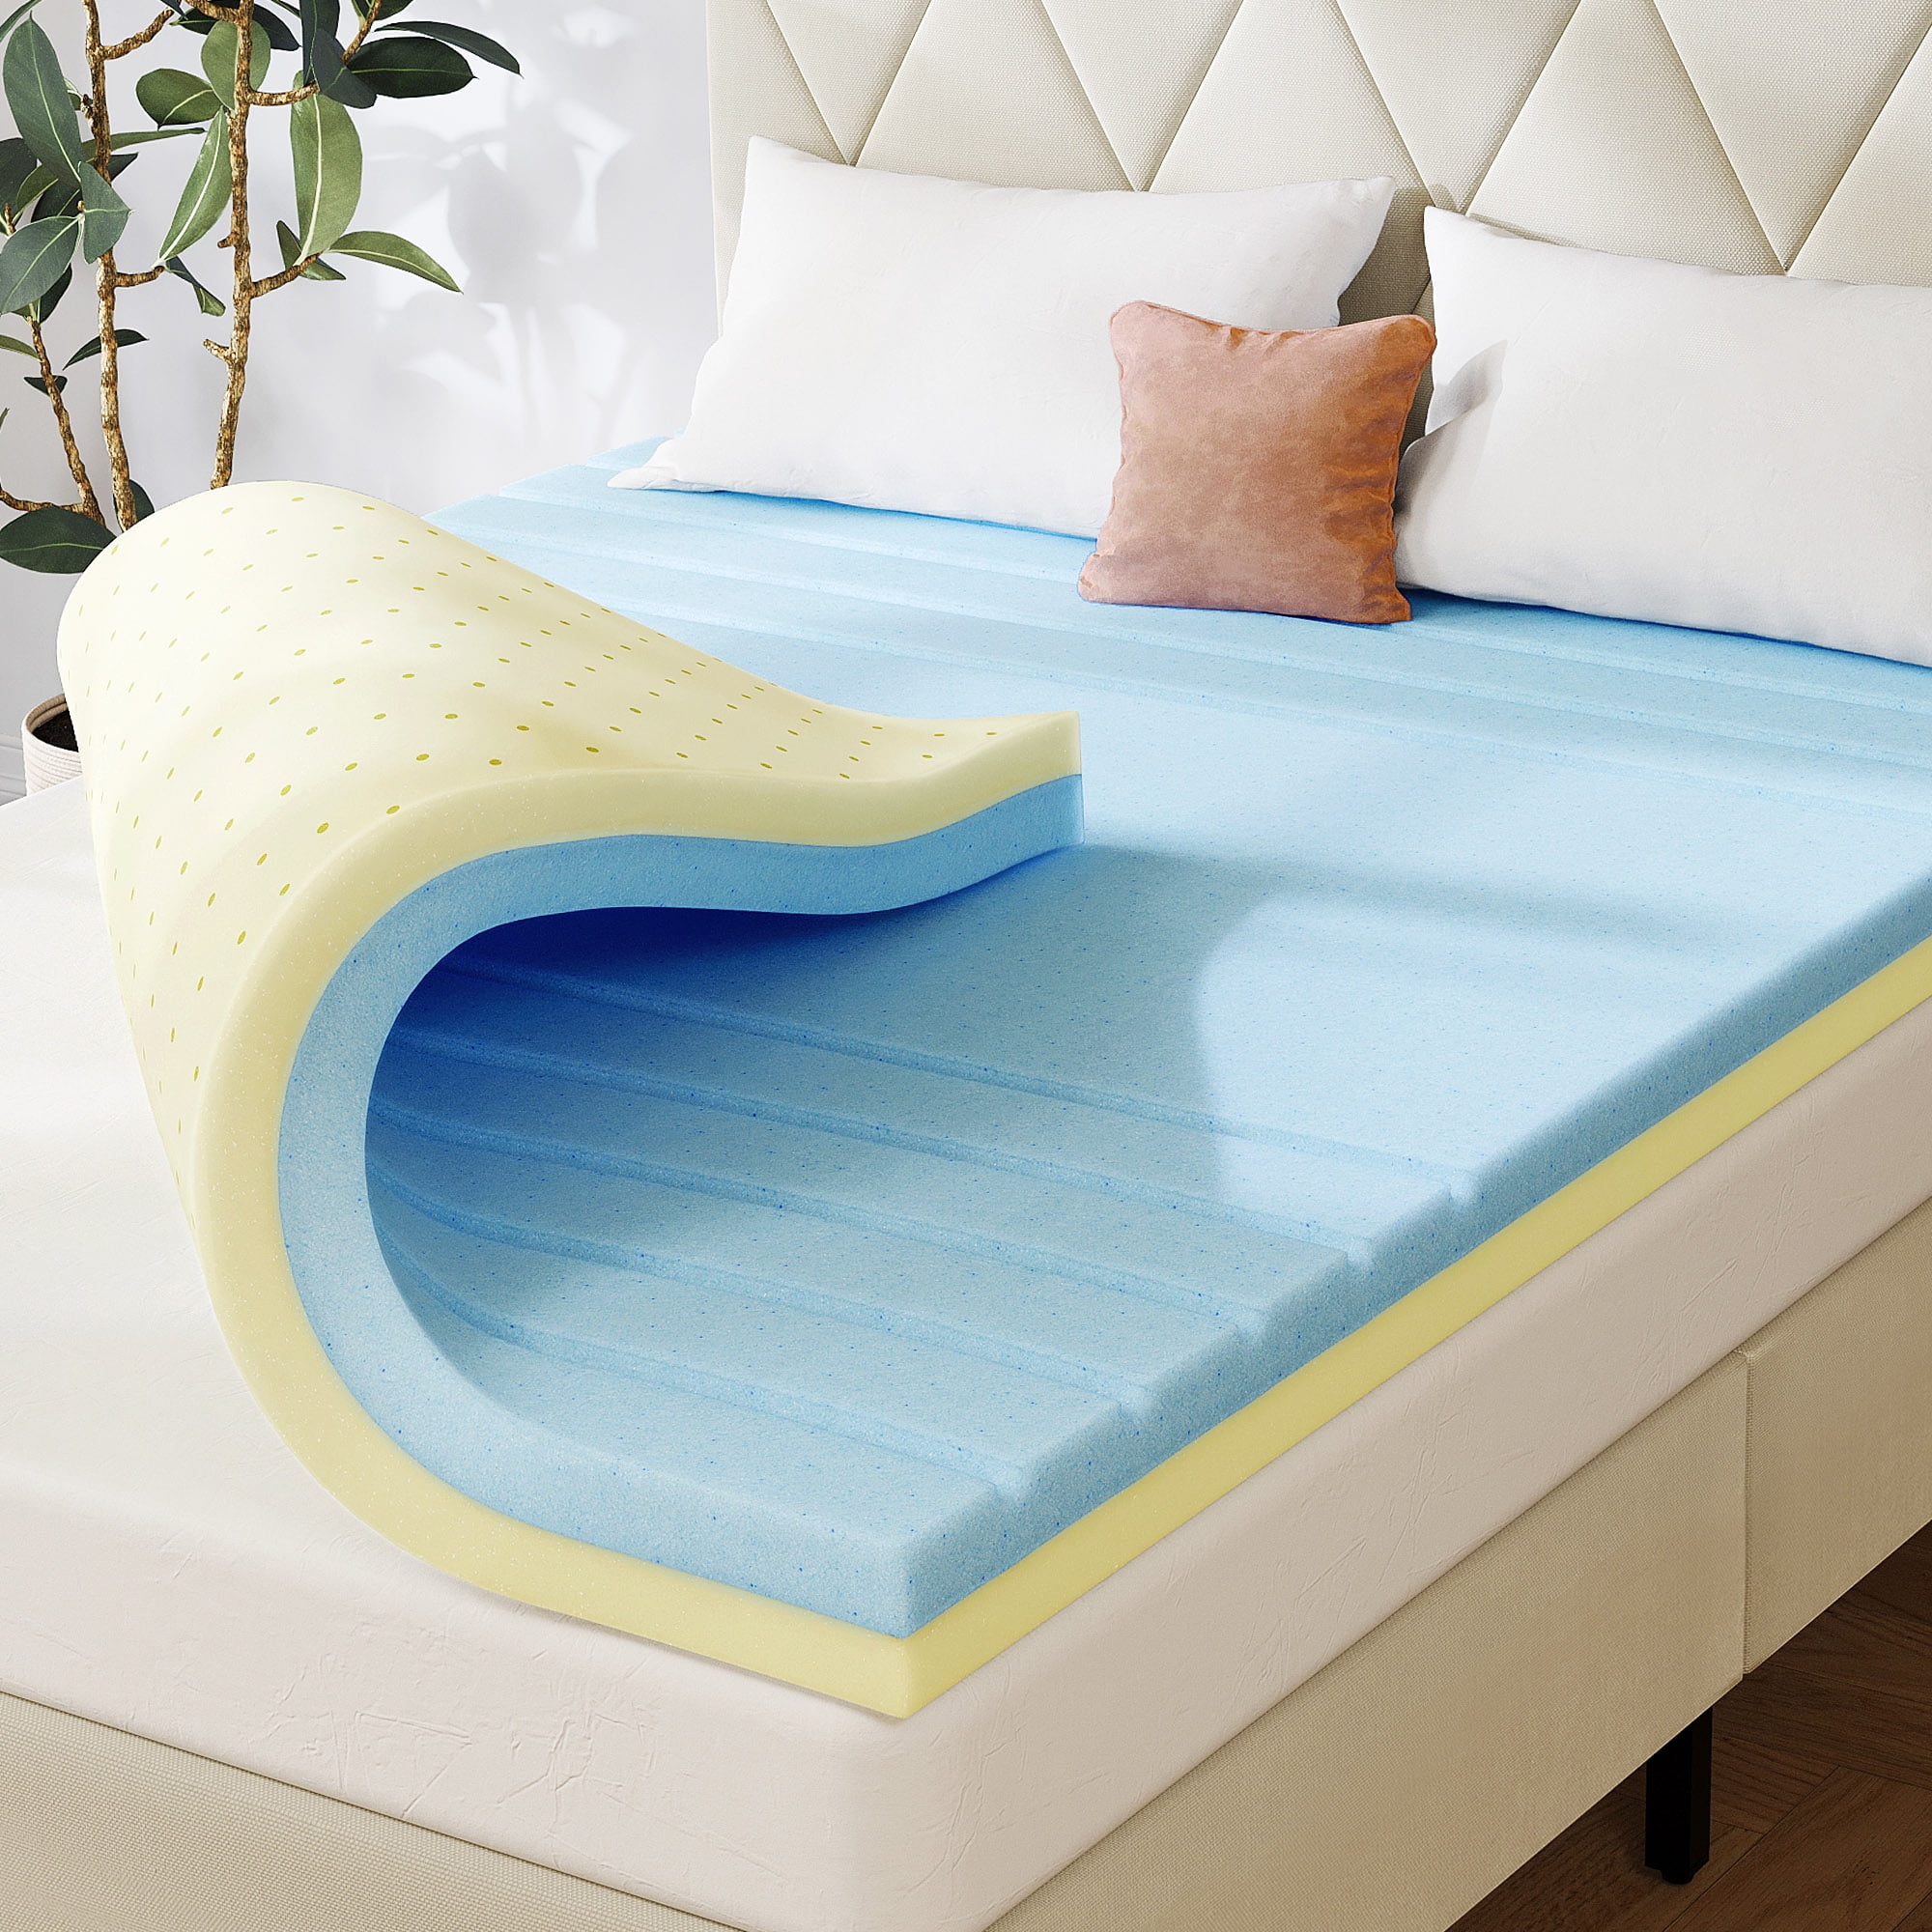 Basics Cooling Gel-Infused Memory Foam Topper, CertiPUR-US Certified - 2-Inch, Queen